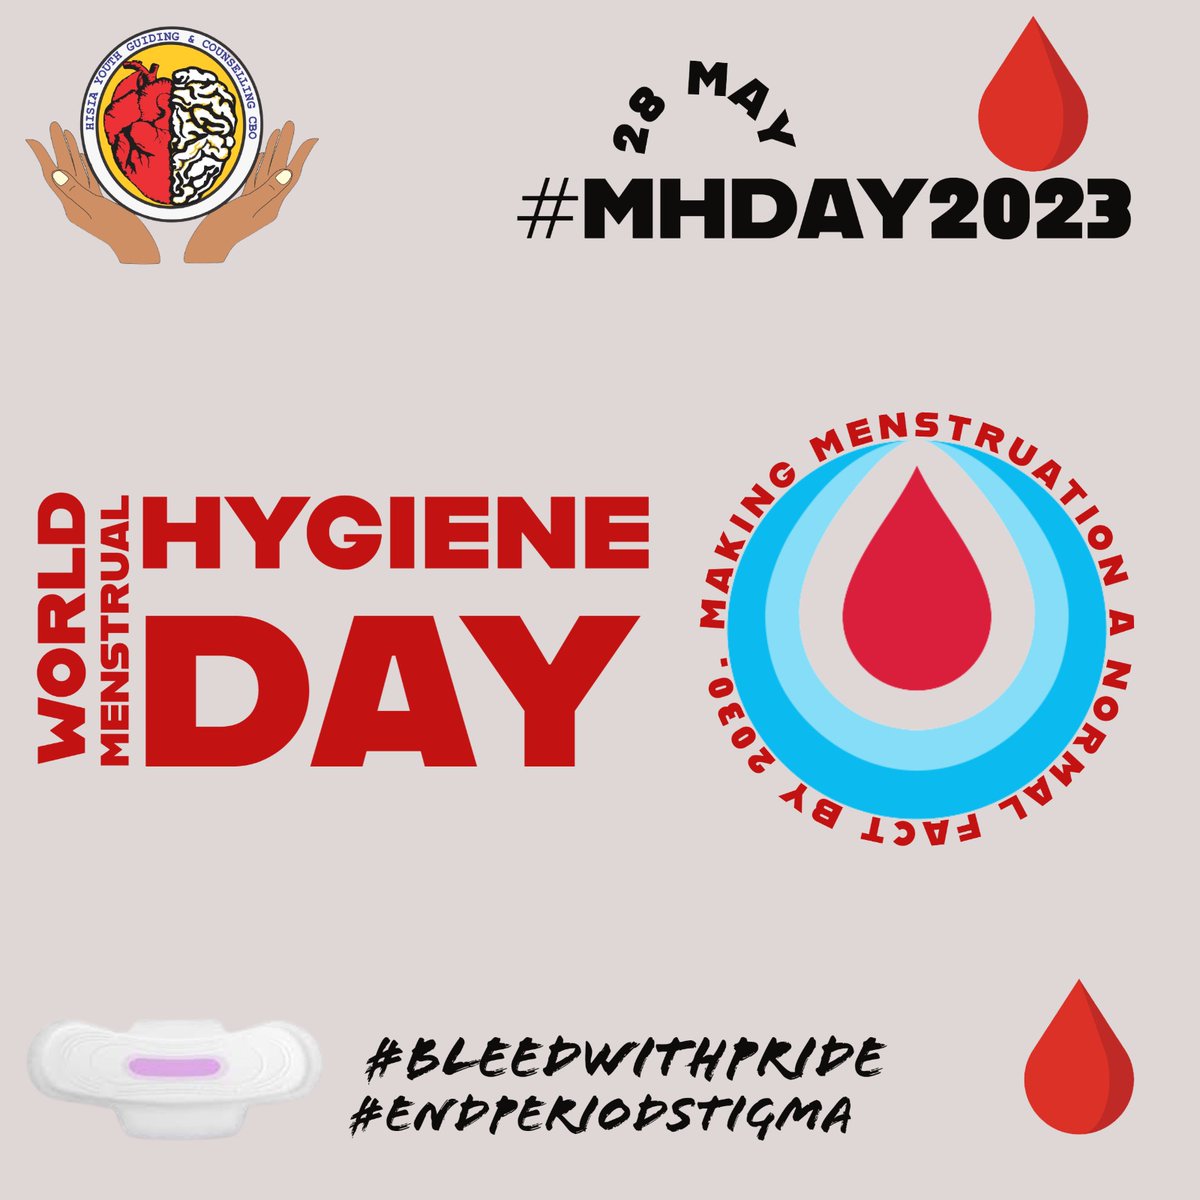 Menstrual Hygiene comes with alot of myths and misconceptions that need to be stopped. We join the rest of the world in celebrating the Menstrual Hygiene Day. Don't forget to buy sanitary pads for your loved ones. #MHDay2023 #EndPeriodStigma #EndPeriodPoverty #Bleedwithpride